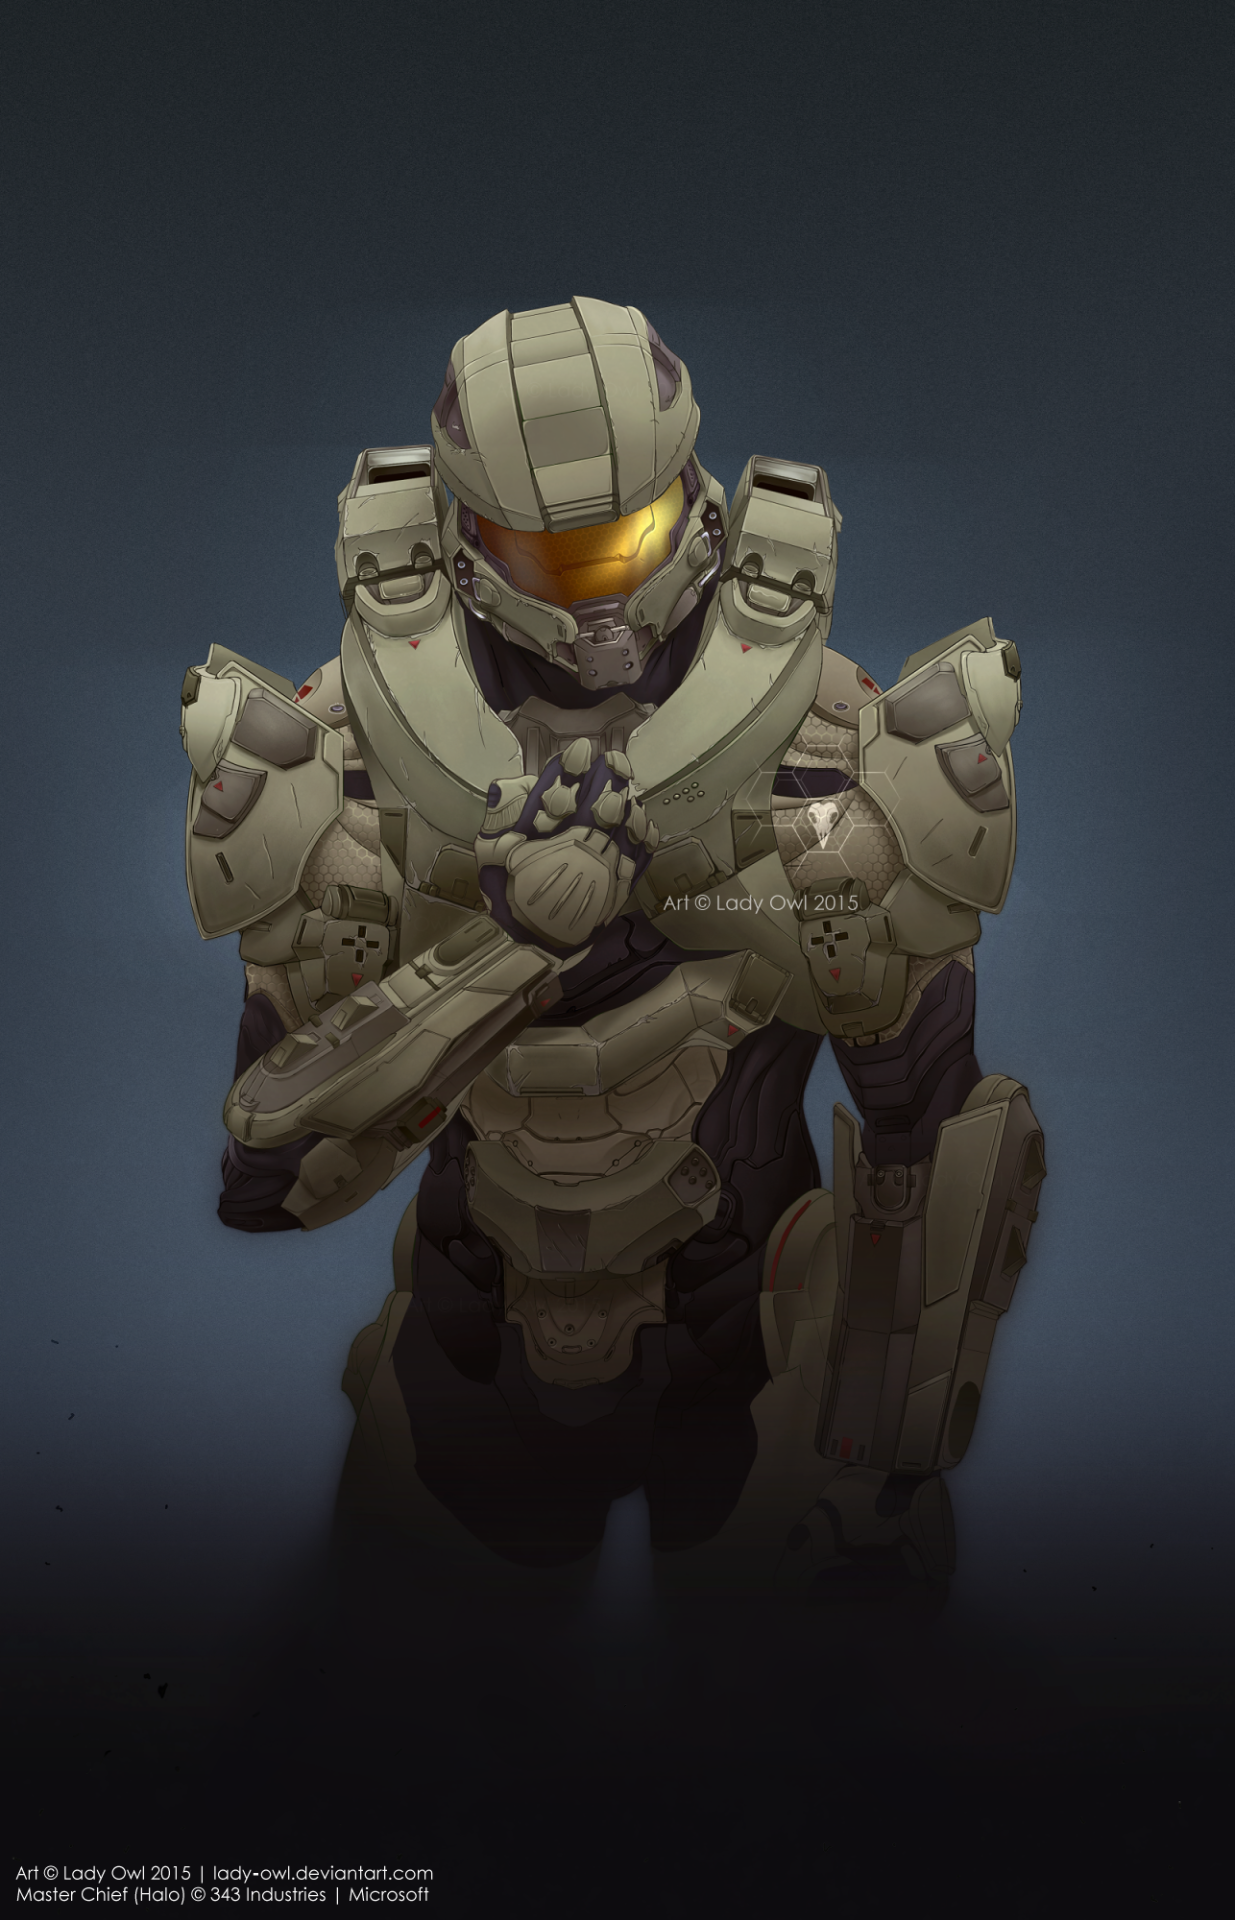 Lady Owl, Master Chief John 117 as he appears in Halo 5:...